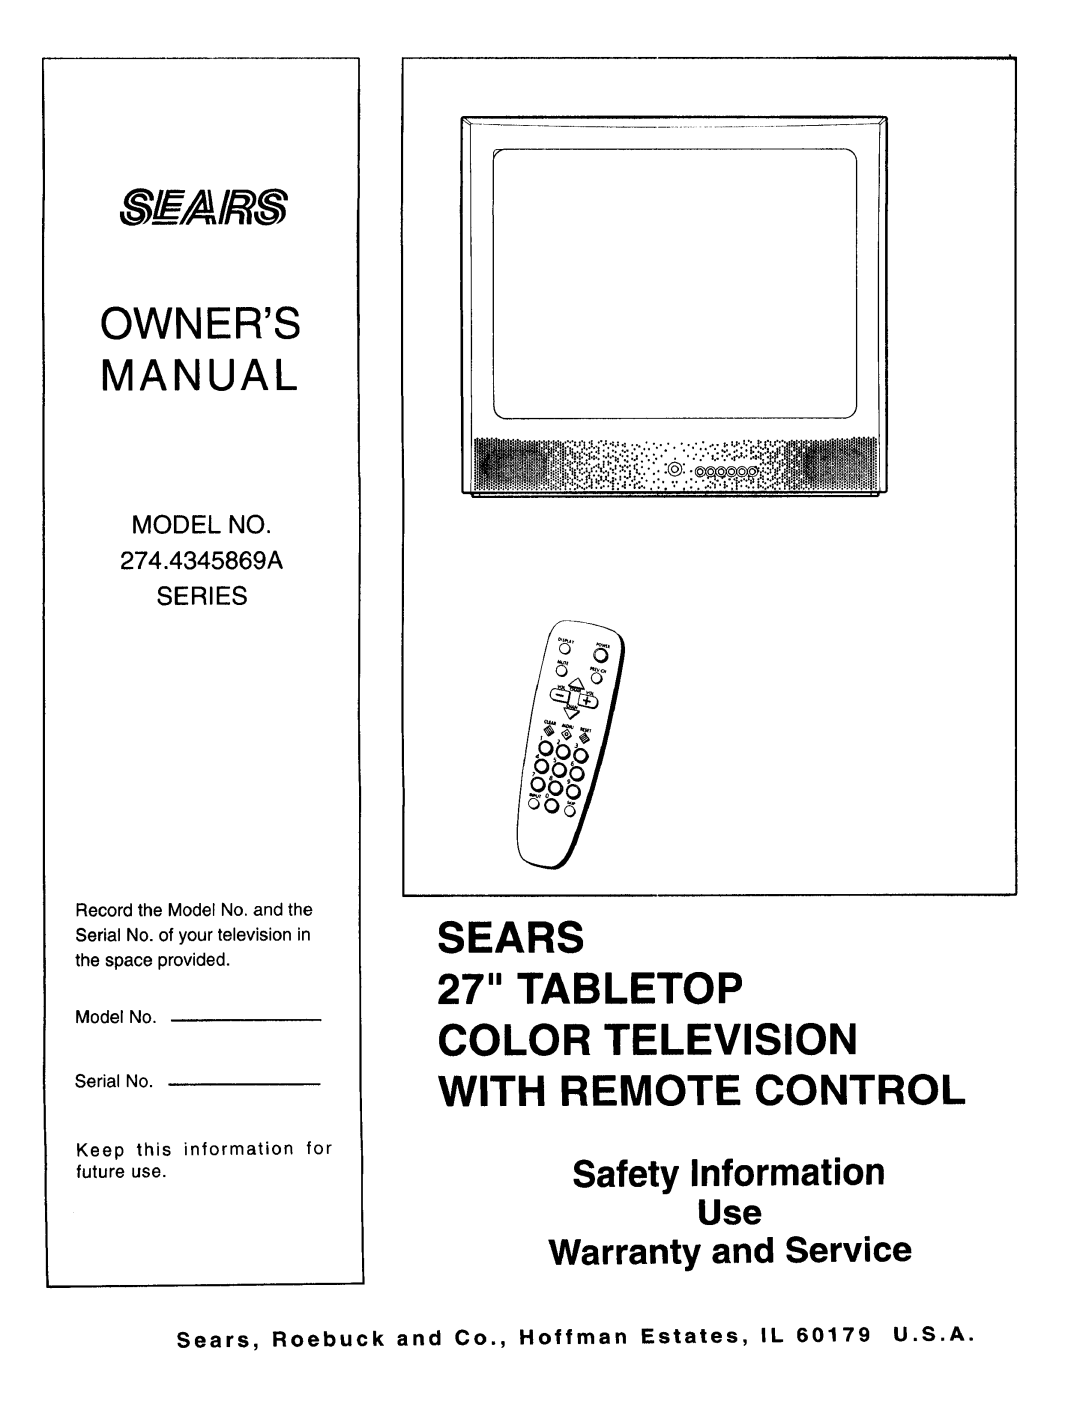 Sears 274.4345869A owner manual Owners Manual, Tabletop Color Television, With Remote Control, Sears, Safety Information 